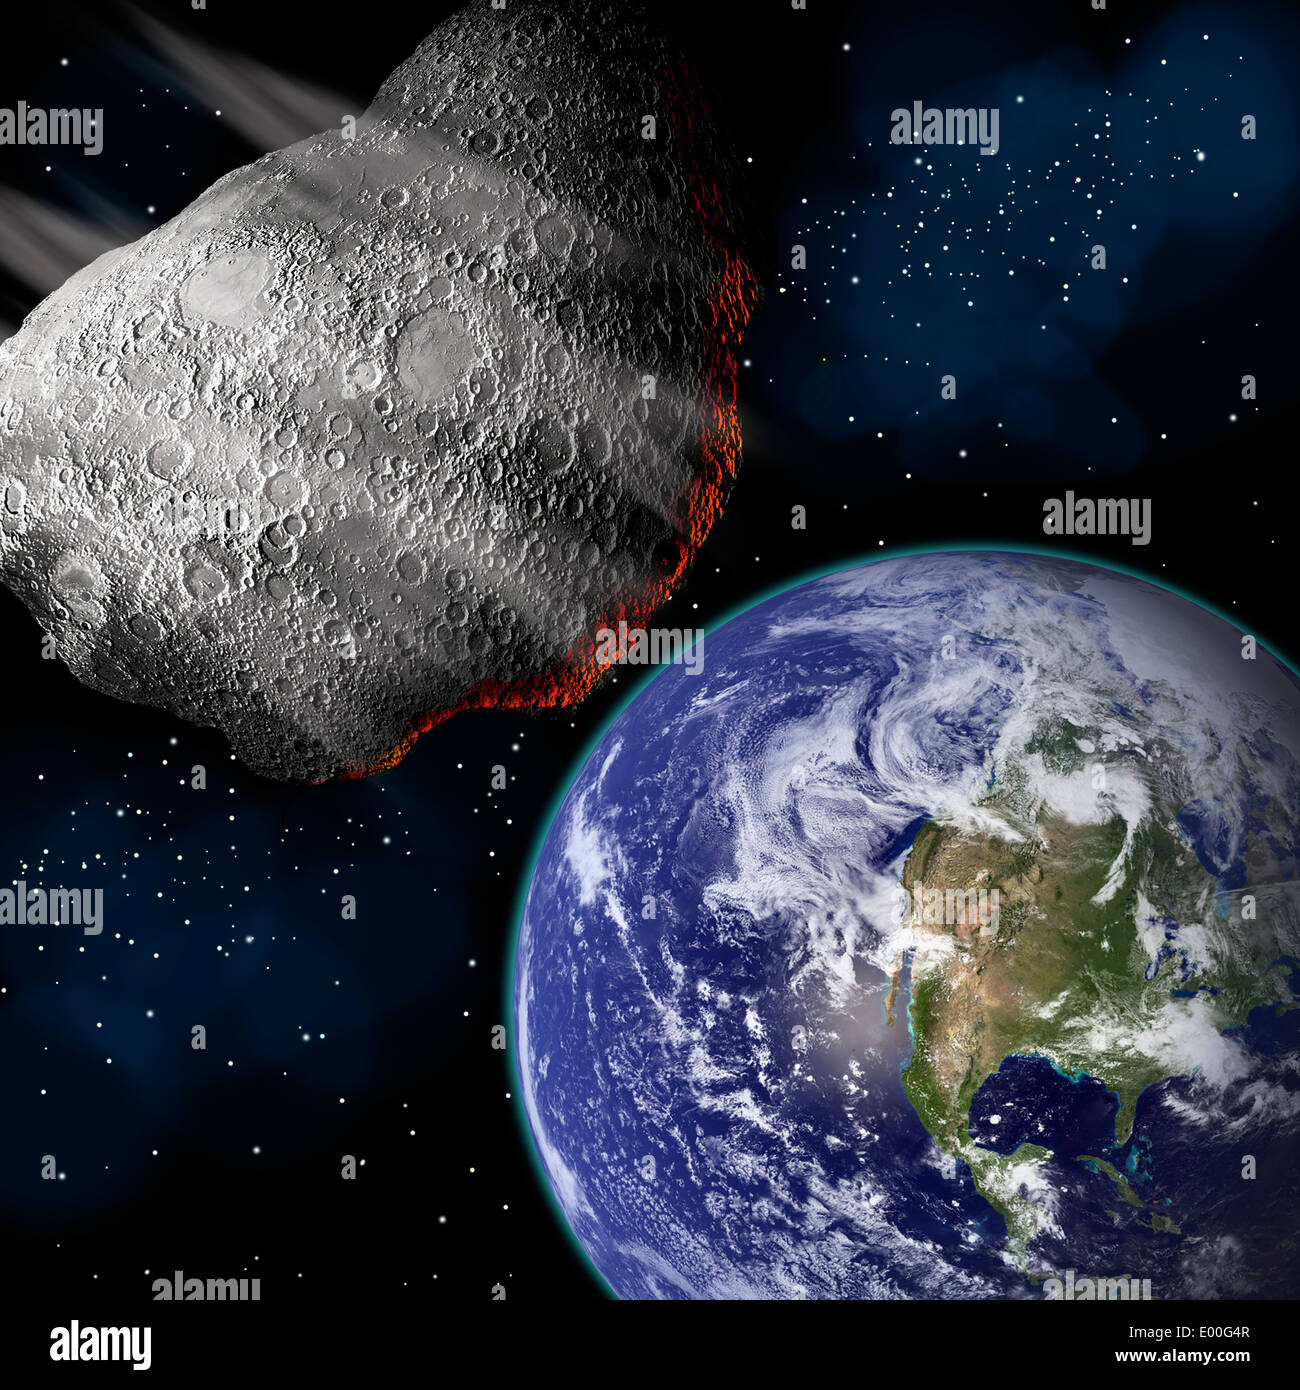 Artist's depiction of a large asteroid approaching Earth on a collision course. Stock Photo